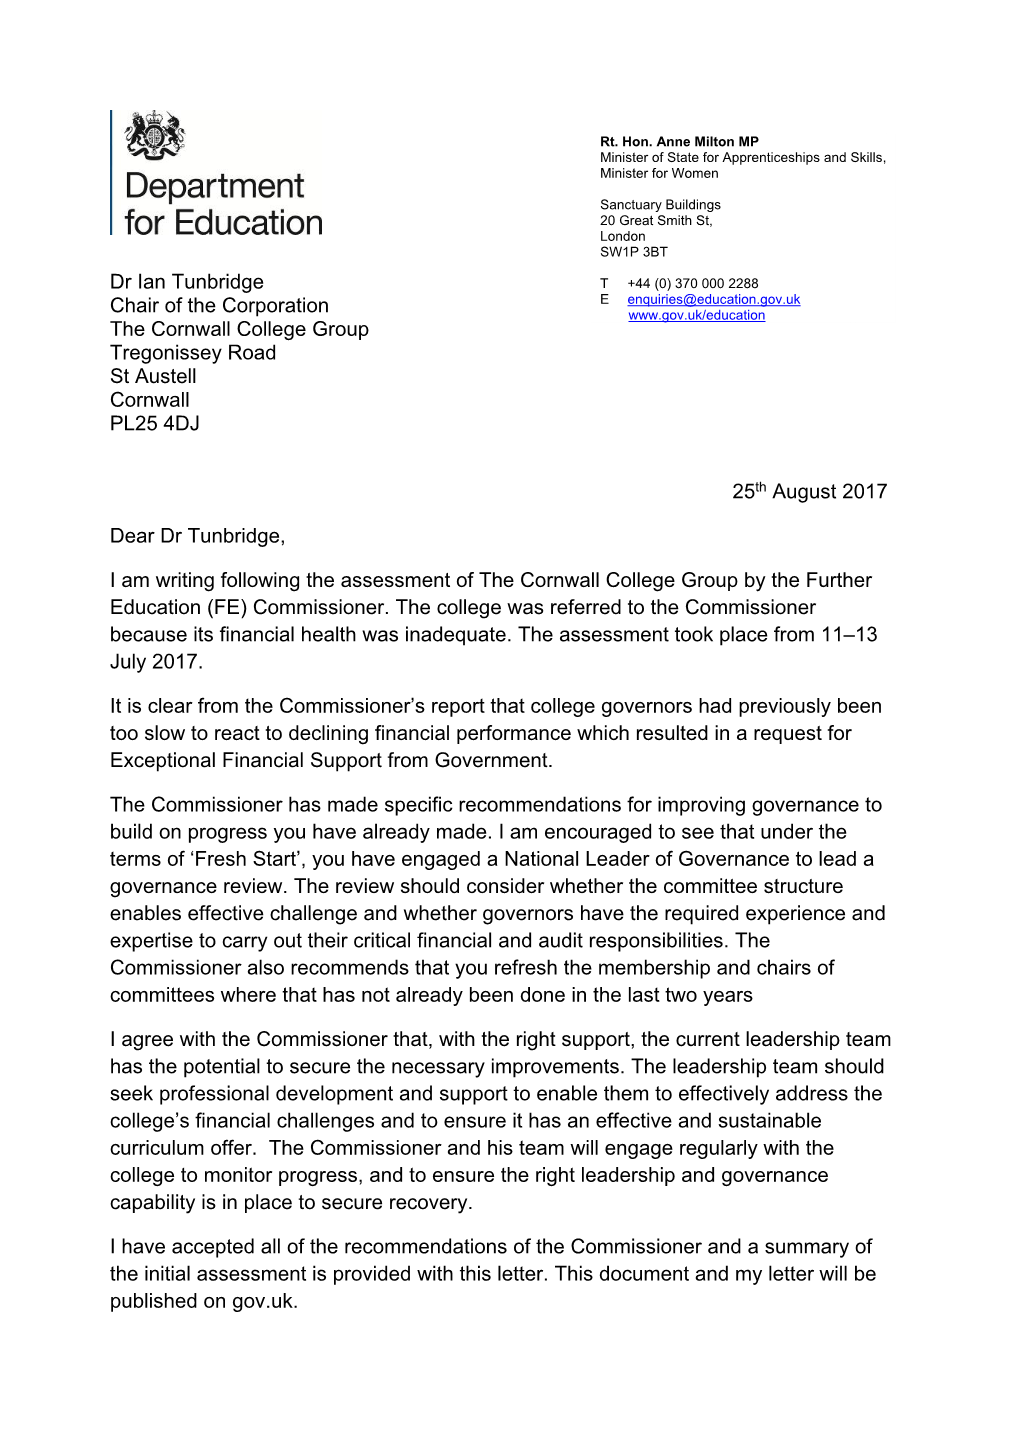 Letter from Anne Milton to the Cornwall College Group Chair